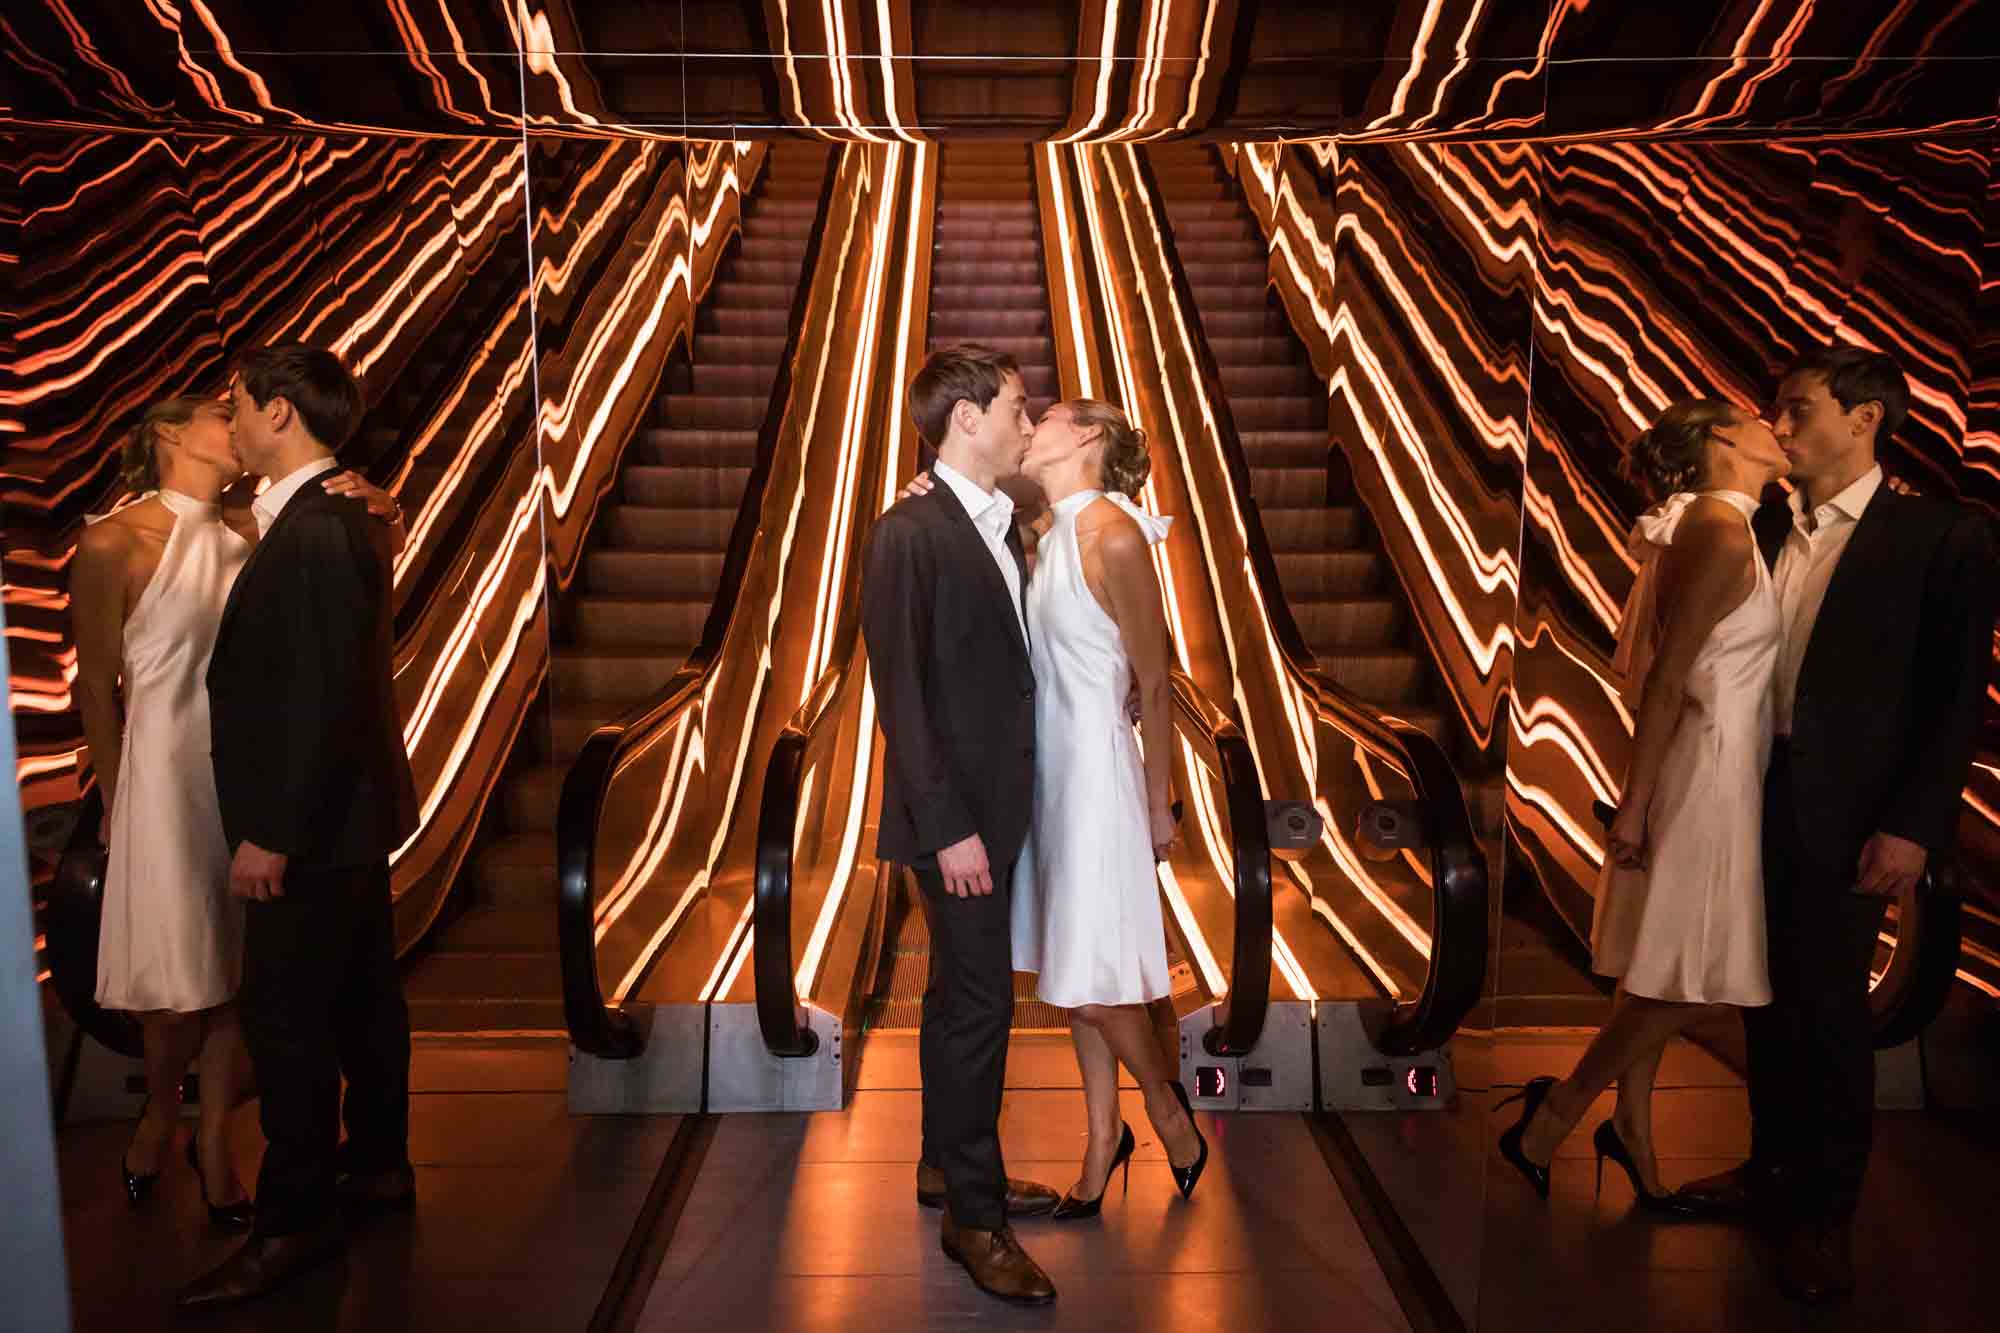 Bride and groom kissing in front of escalators with neon yellow lights